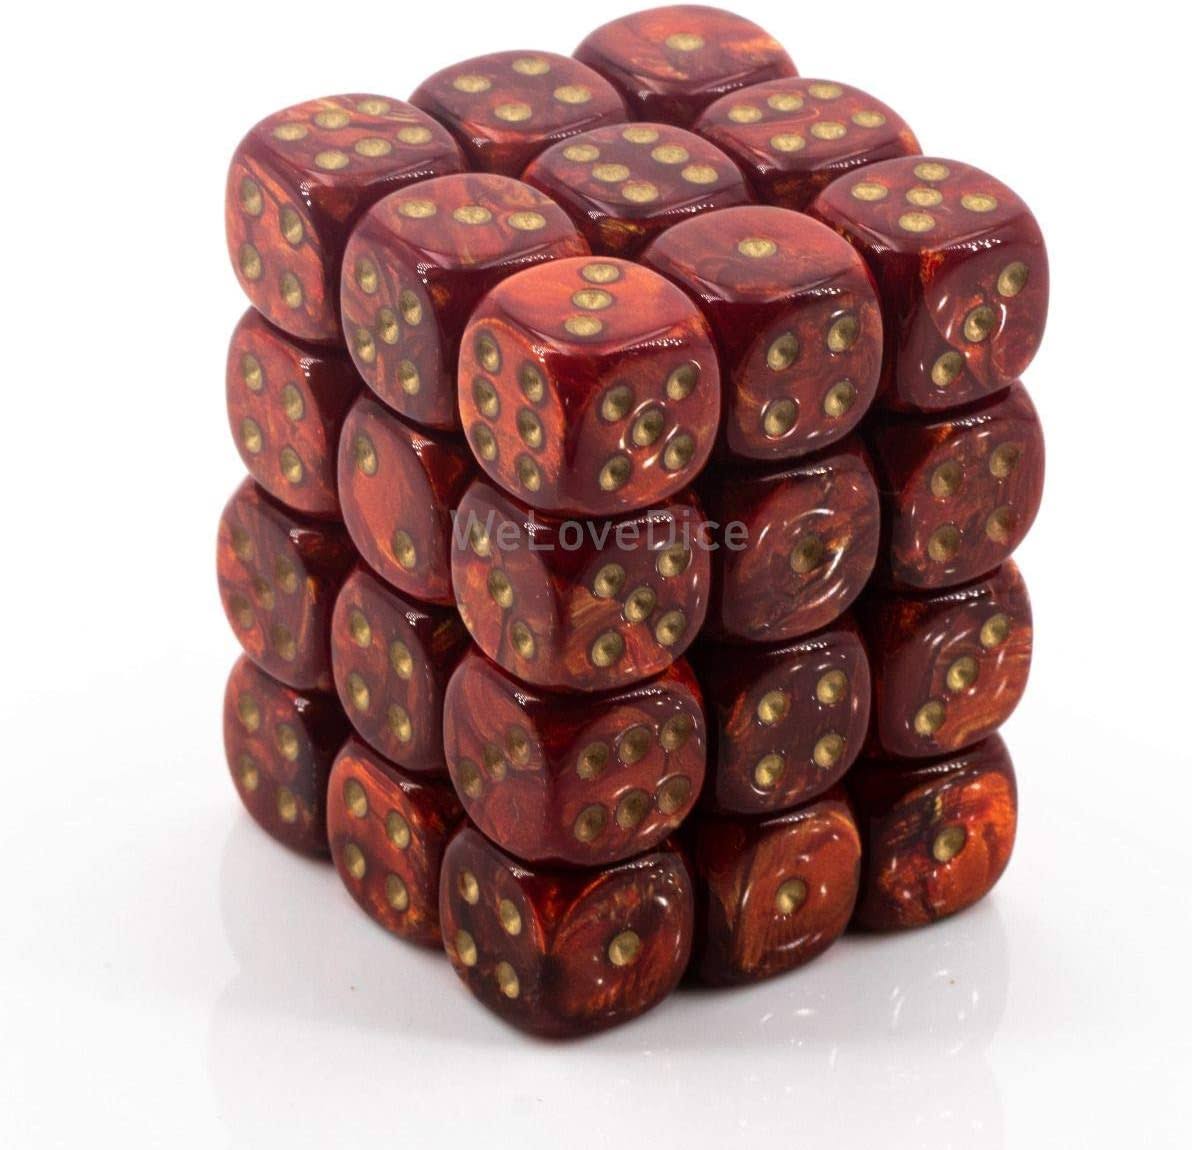 Chessex 12 mm D6 Dice Block: Scarab Scarlet / Gold